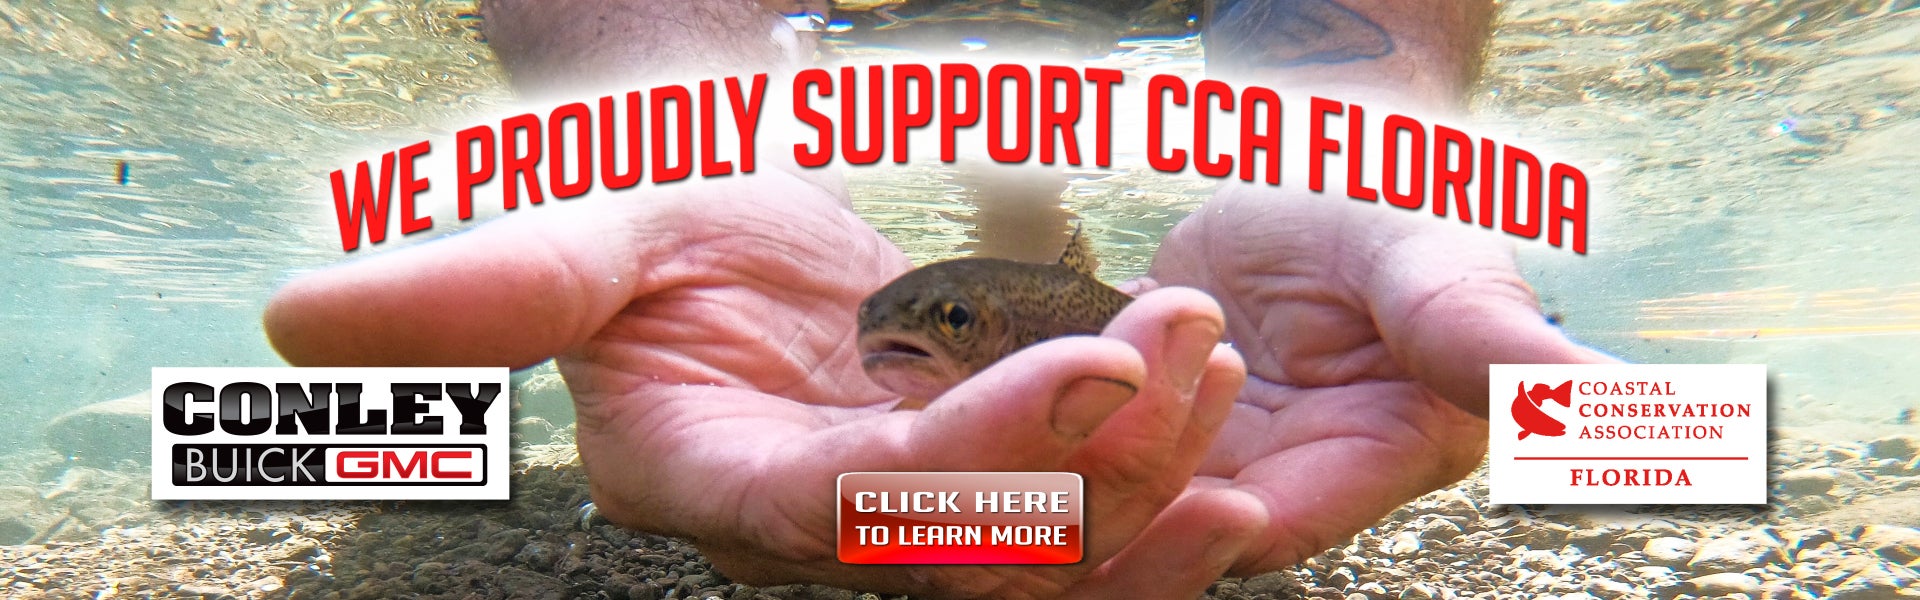 We Proudly Support CCA Florida